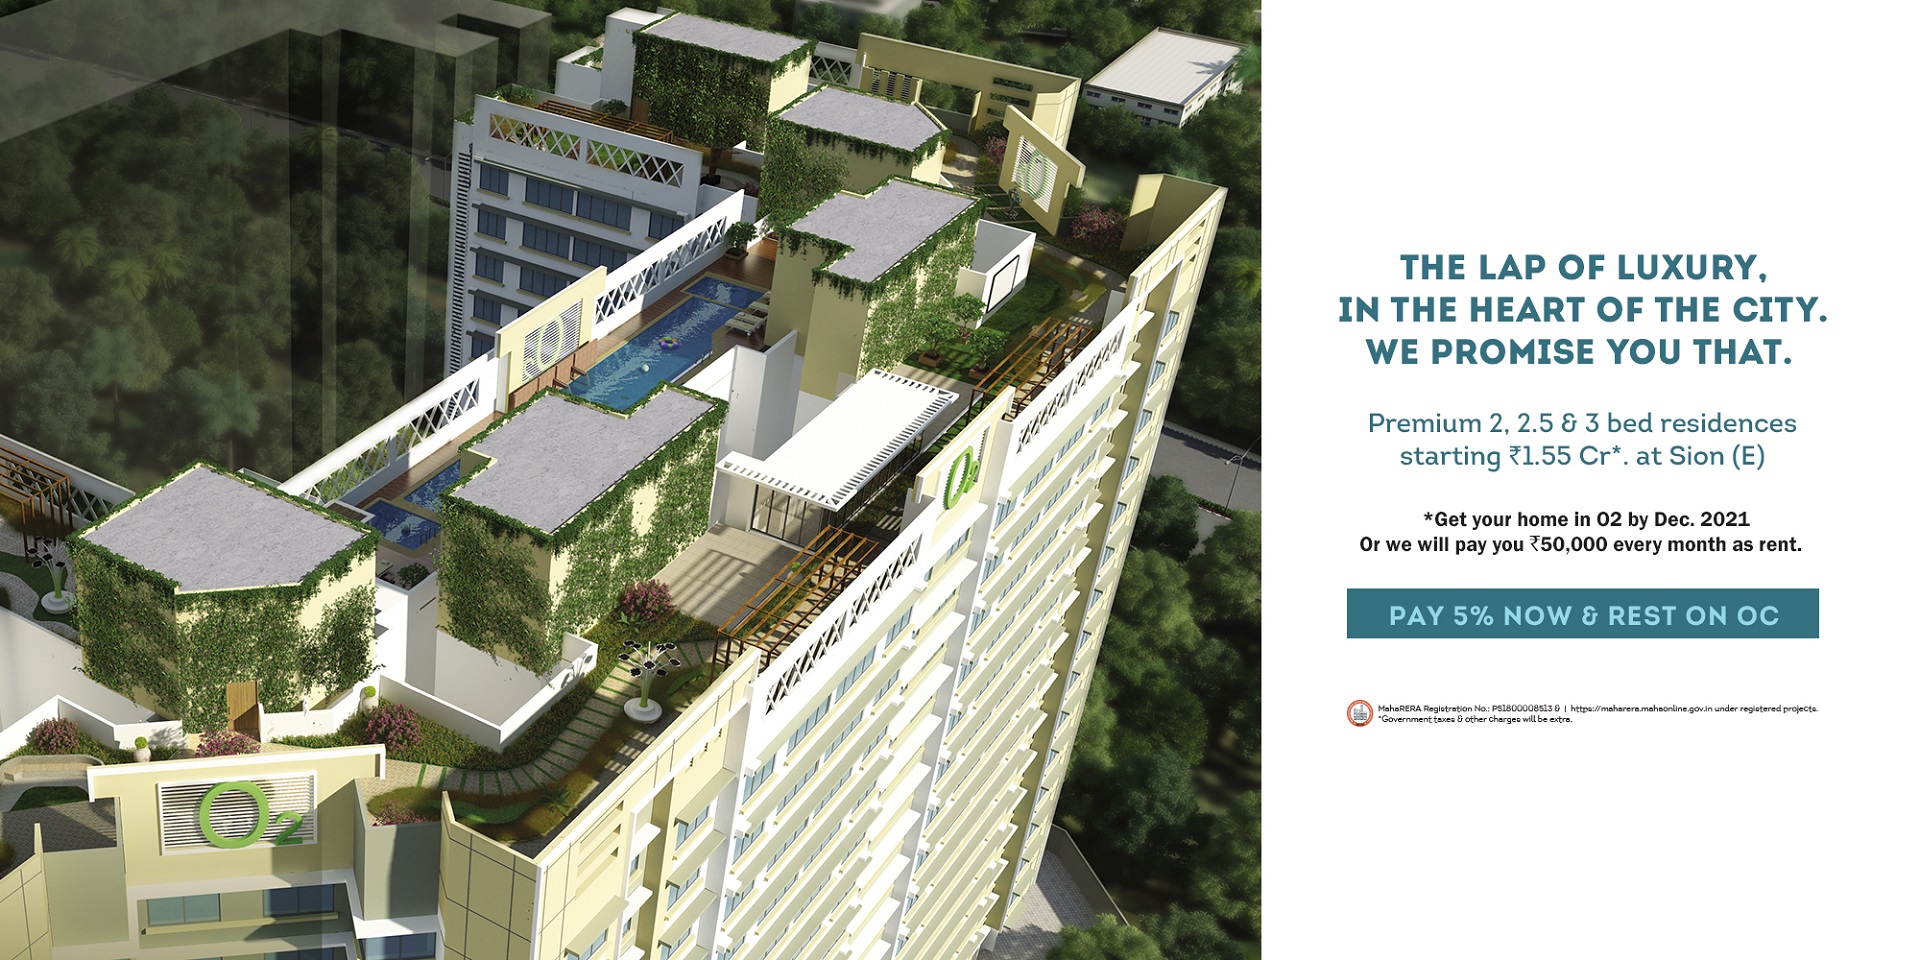 Premium 2, 2.5 & 3 bed residences starting Rs 1.55 Cr at Ahuja O2 in Sion (E), Mumbai Update